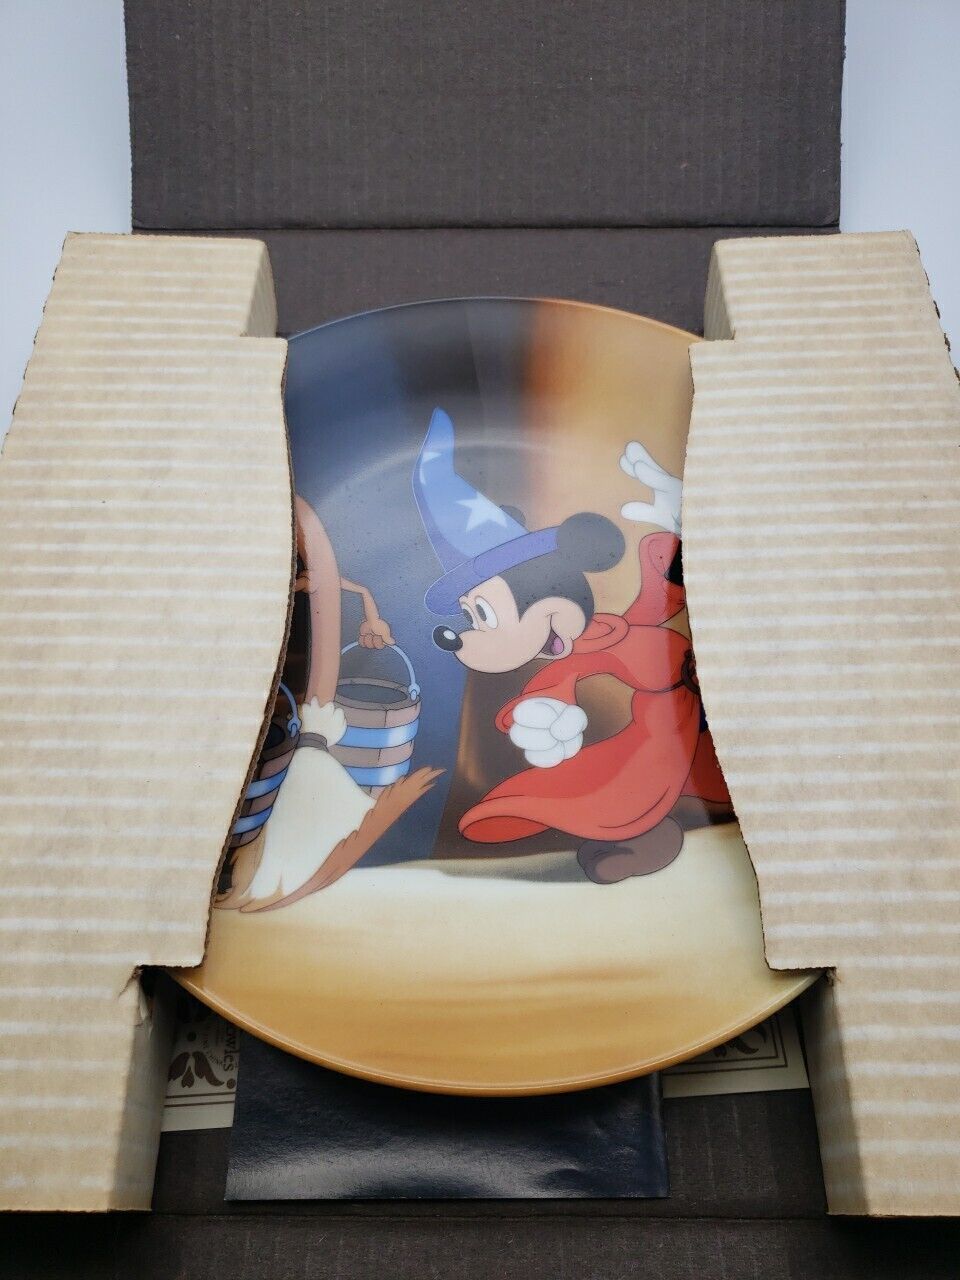 Disney Fantasia Knowles Mickey Mouse Plate LE “the Mischievous Apprentice” NEW!! - $39.59